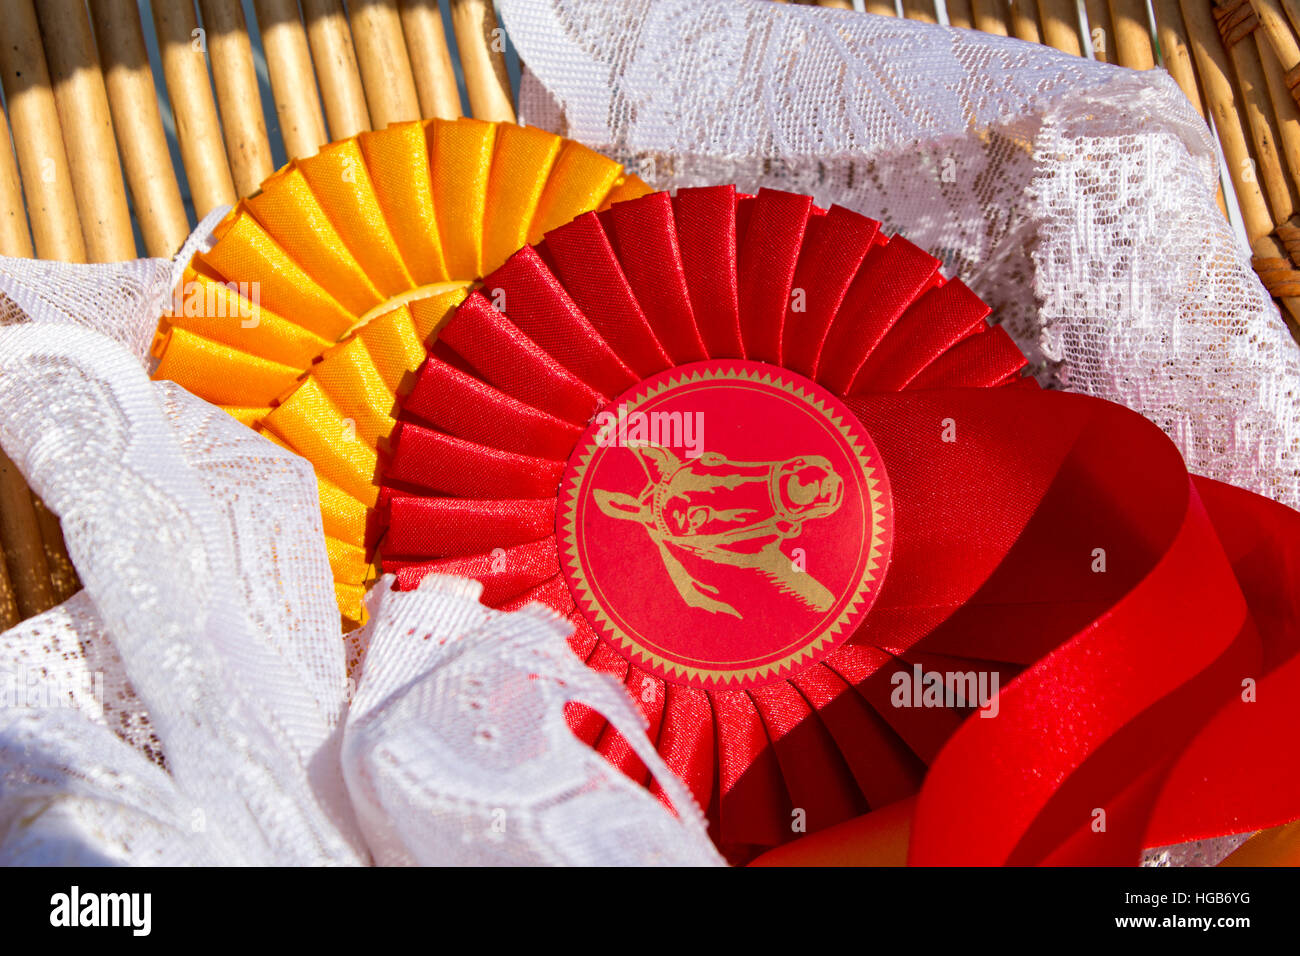 Award rosettes for winner in equestrian sport with red and yellow colors Stock Photo